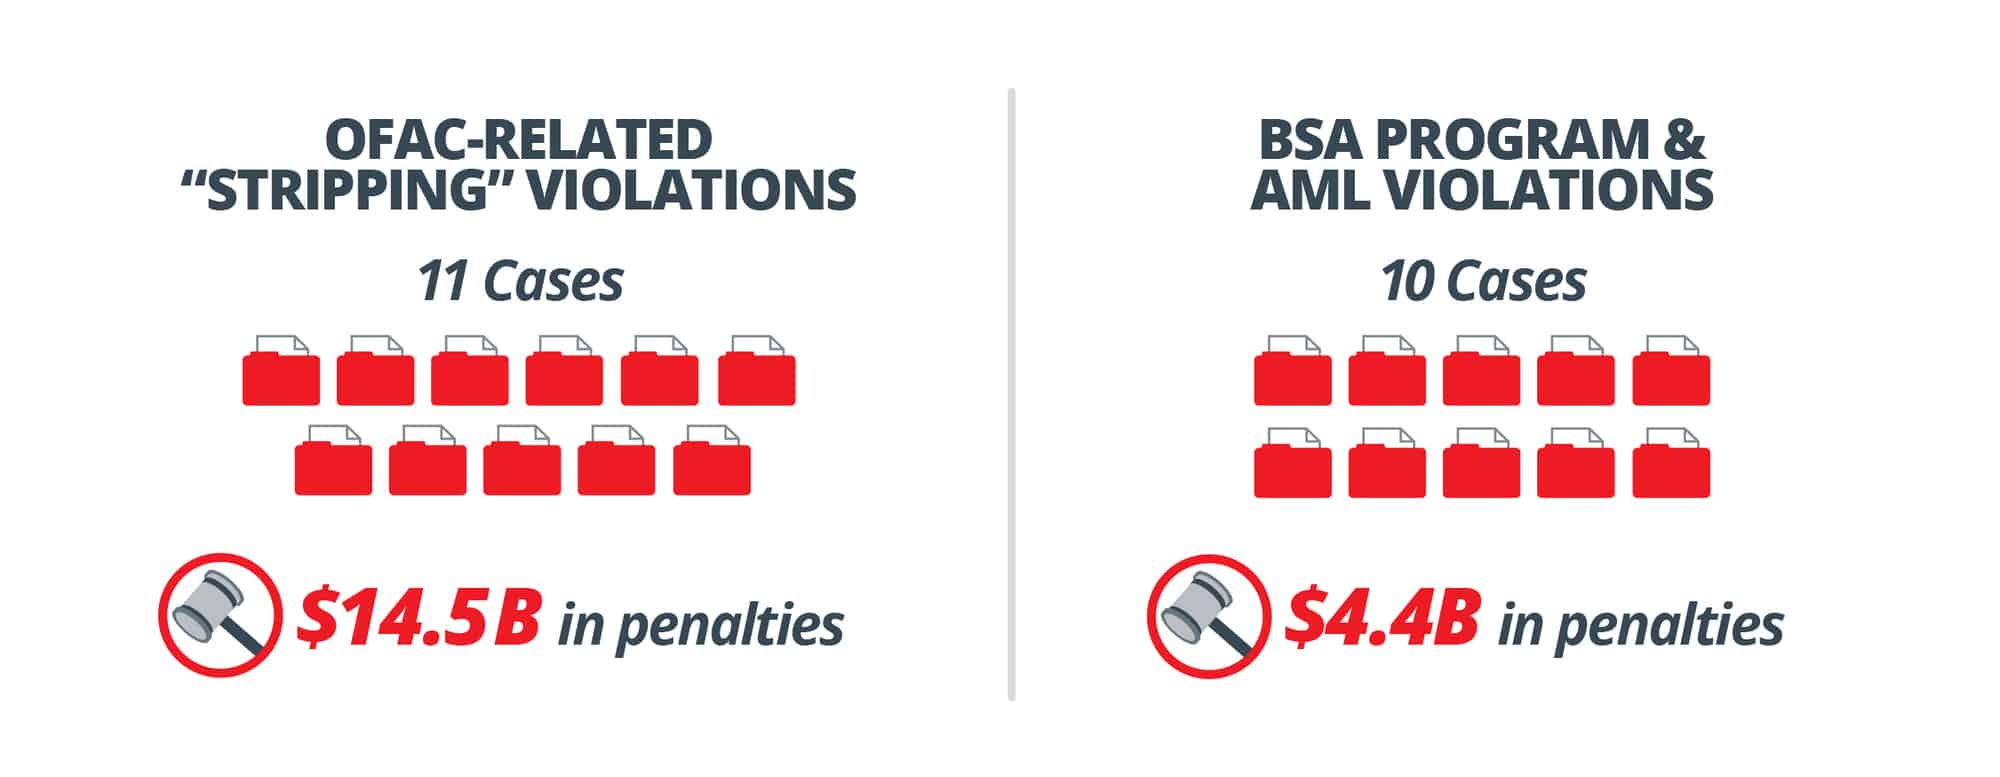 OFAC-related “stripping” violations: 11 cases, $14.5 billion in penalties. BSA program and AML violations: 10 cases, $4.4 billion in penalties